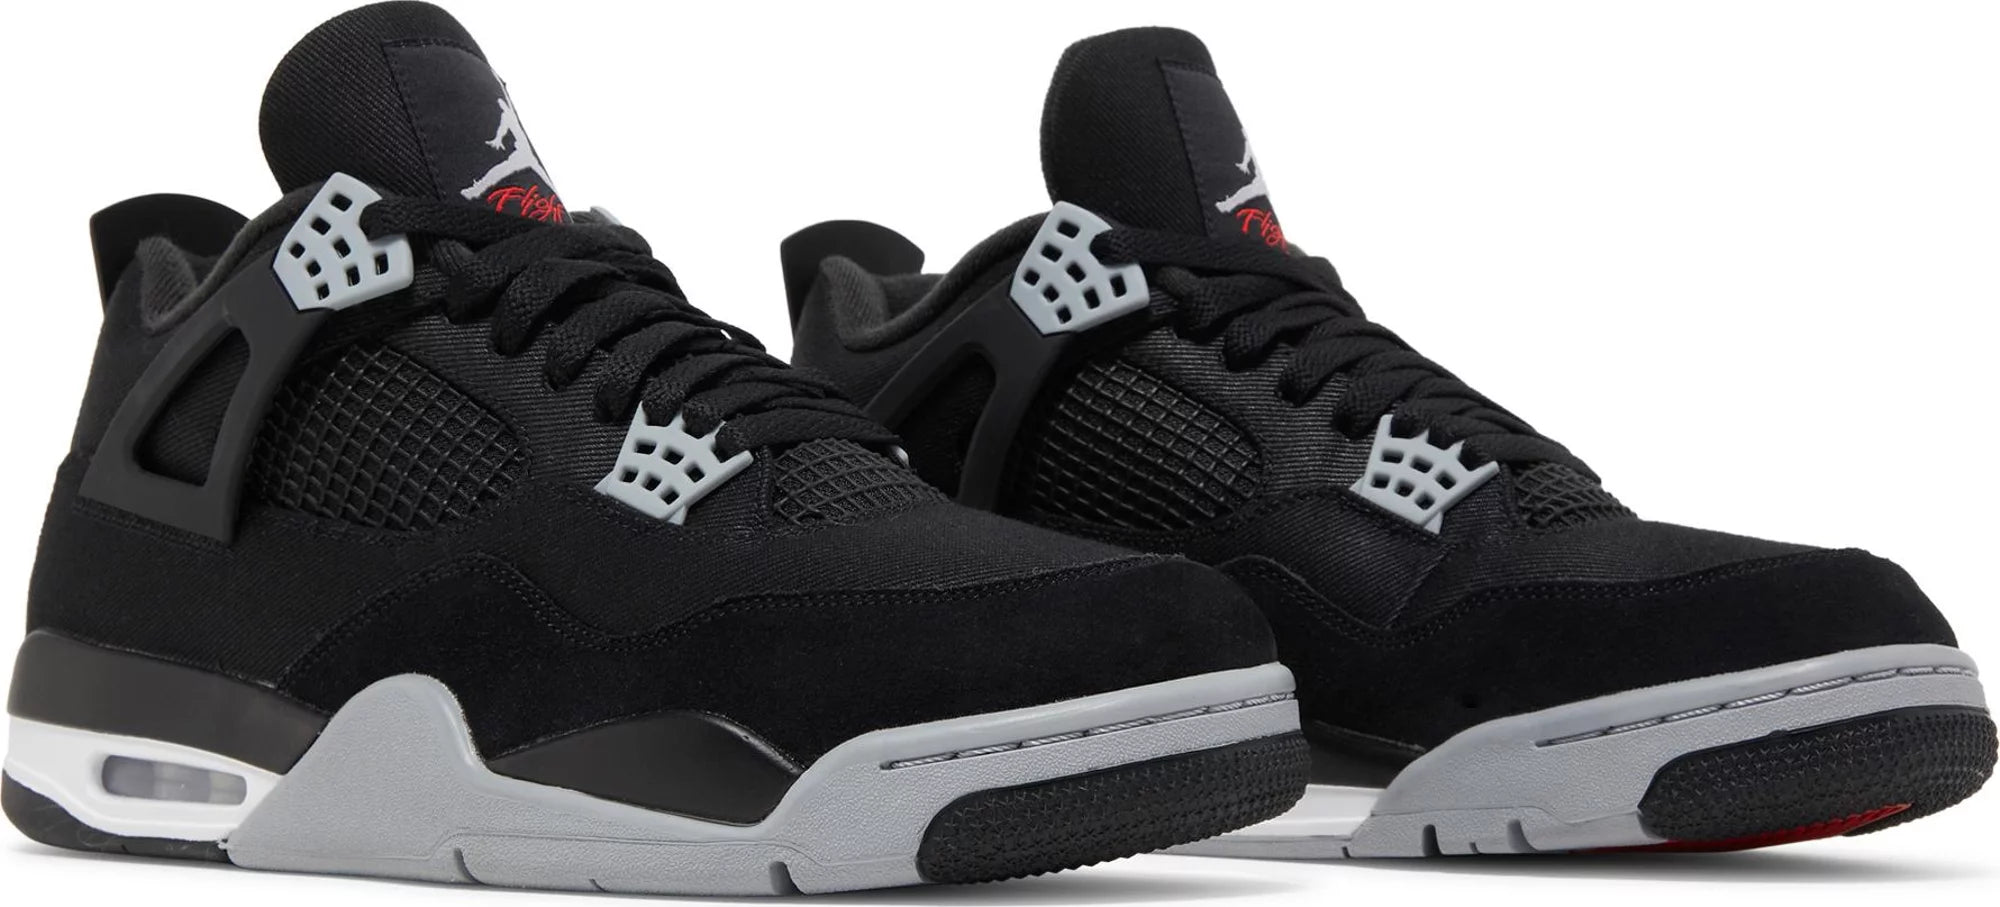 The Air Jordan 4 “Black Canvas” will Shock Drop tomorrow‼️😱🤯 **NO SIZES  10-14M AT ALL** (7M-9.5M, NO SIZE 9 & A COUPLE HUGE